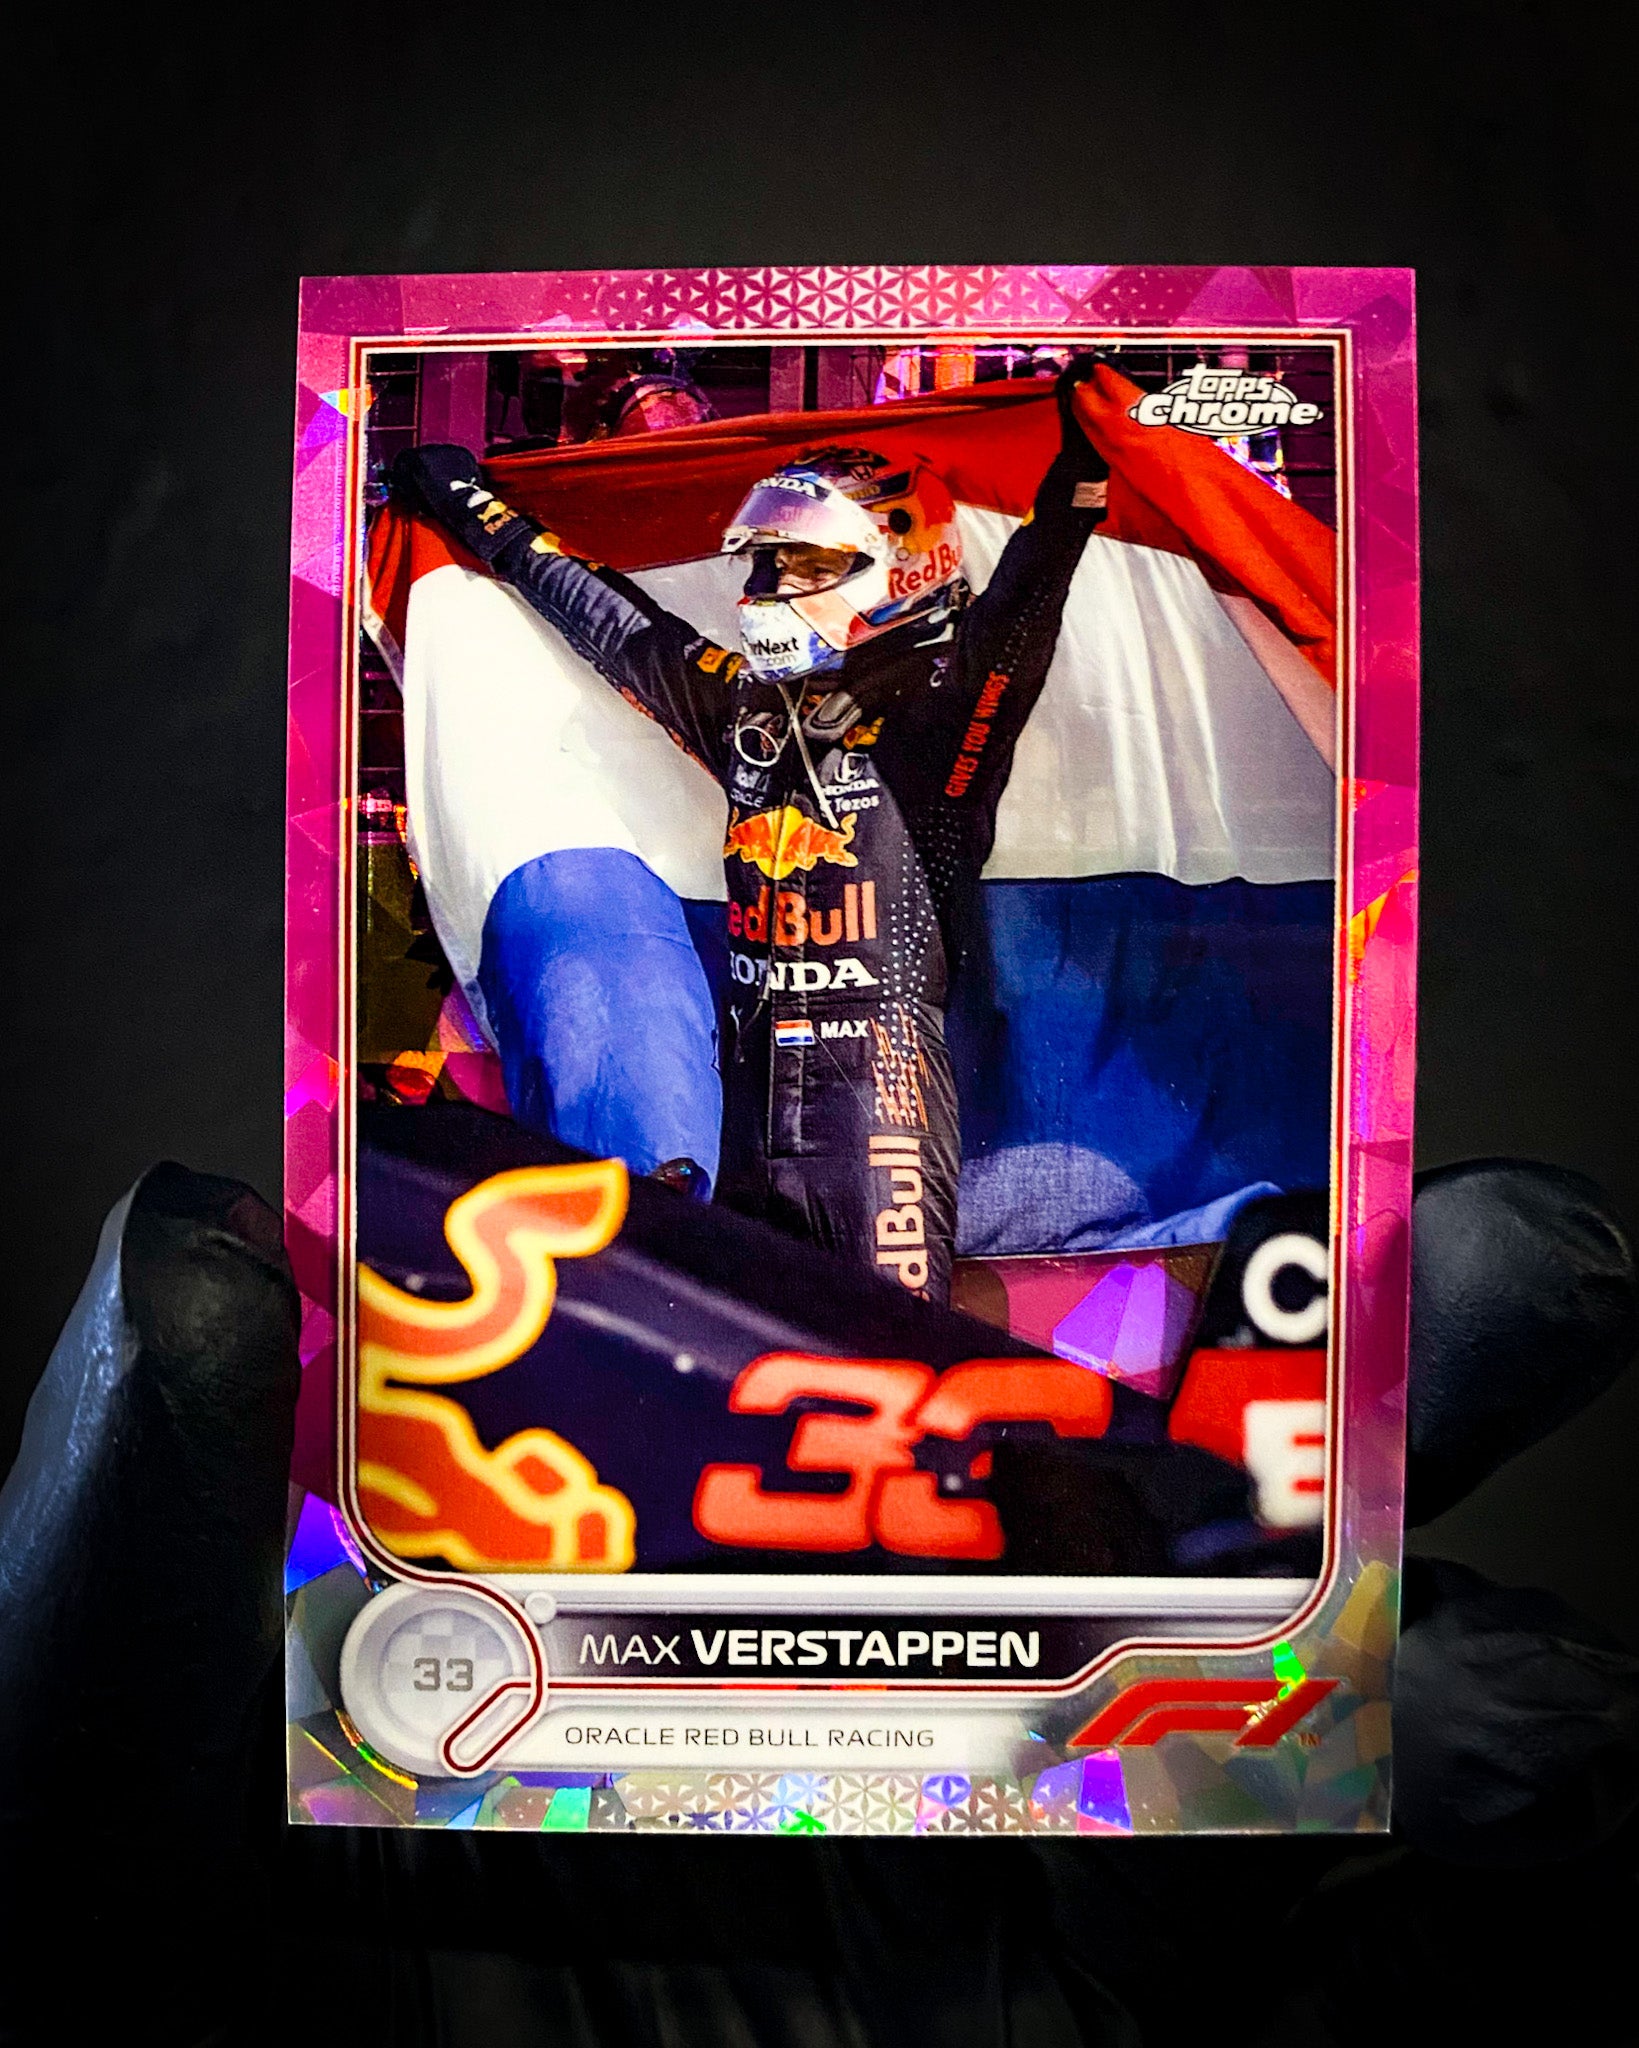 Ballers Bank 2022 Topps Chrome Sapphire Formula 1 F1 Max Verstappen One of One 1 of 1 Image Variation 2 IV 2 Padpradascha Paddy